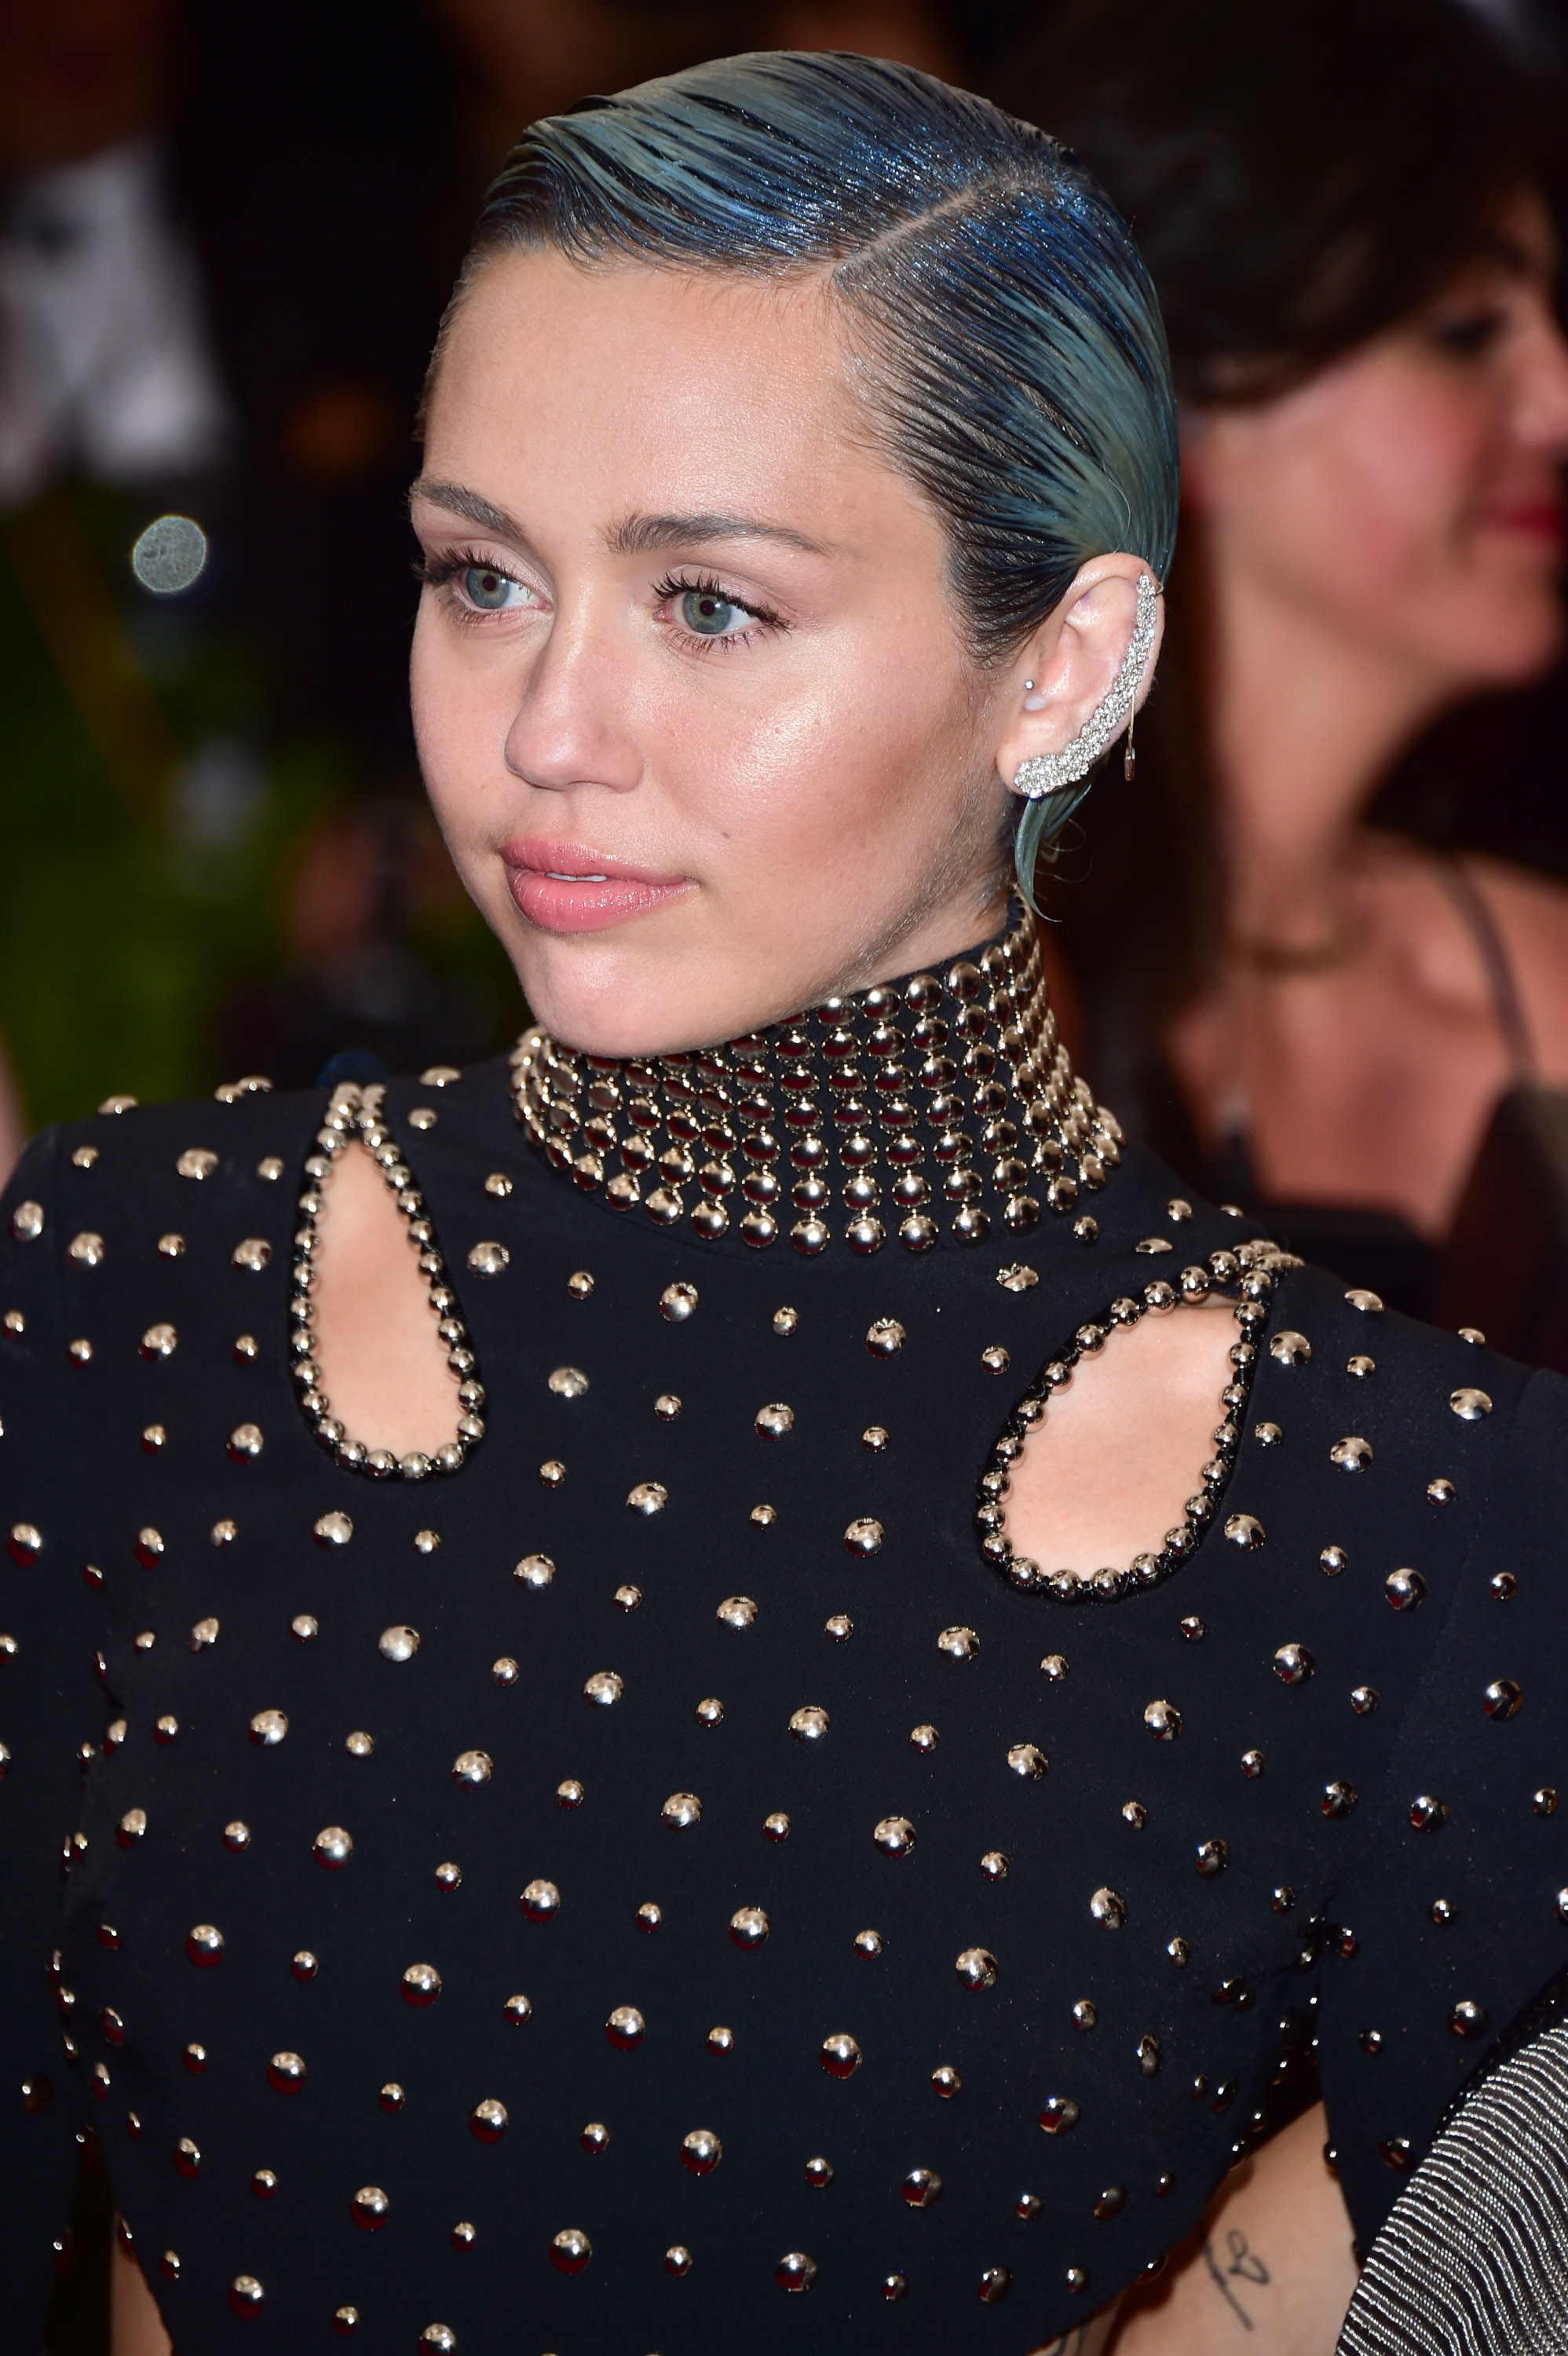 Miley Cyrus attends the "China: Through The Looking Glass" Costume Institute Benefit Gala at Metropolitan Museum of Art on May 4, 2015, in New York City (George Pimentel—WireImage/Getty Images)